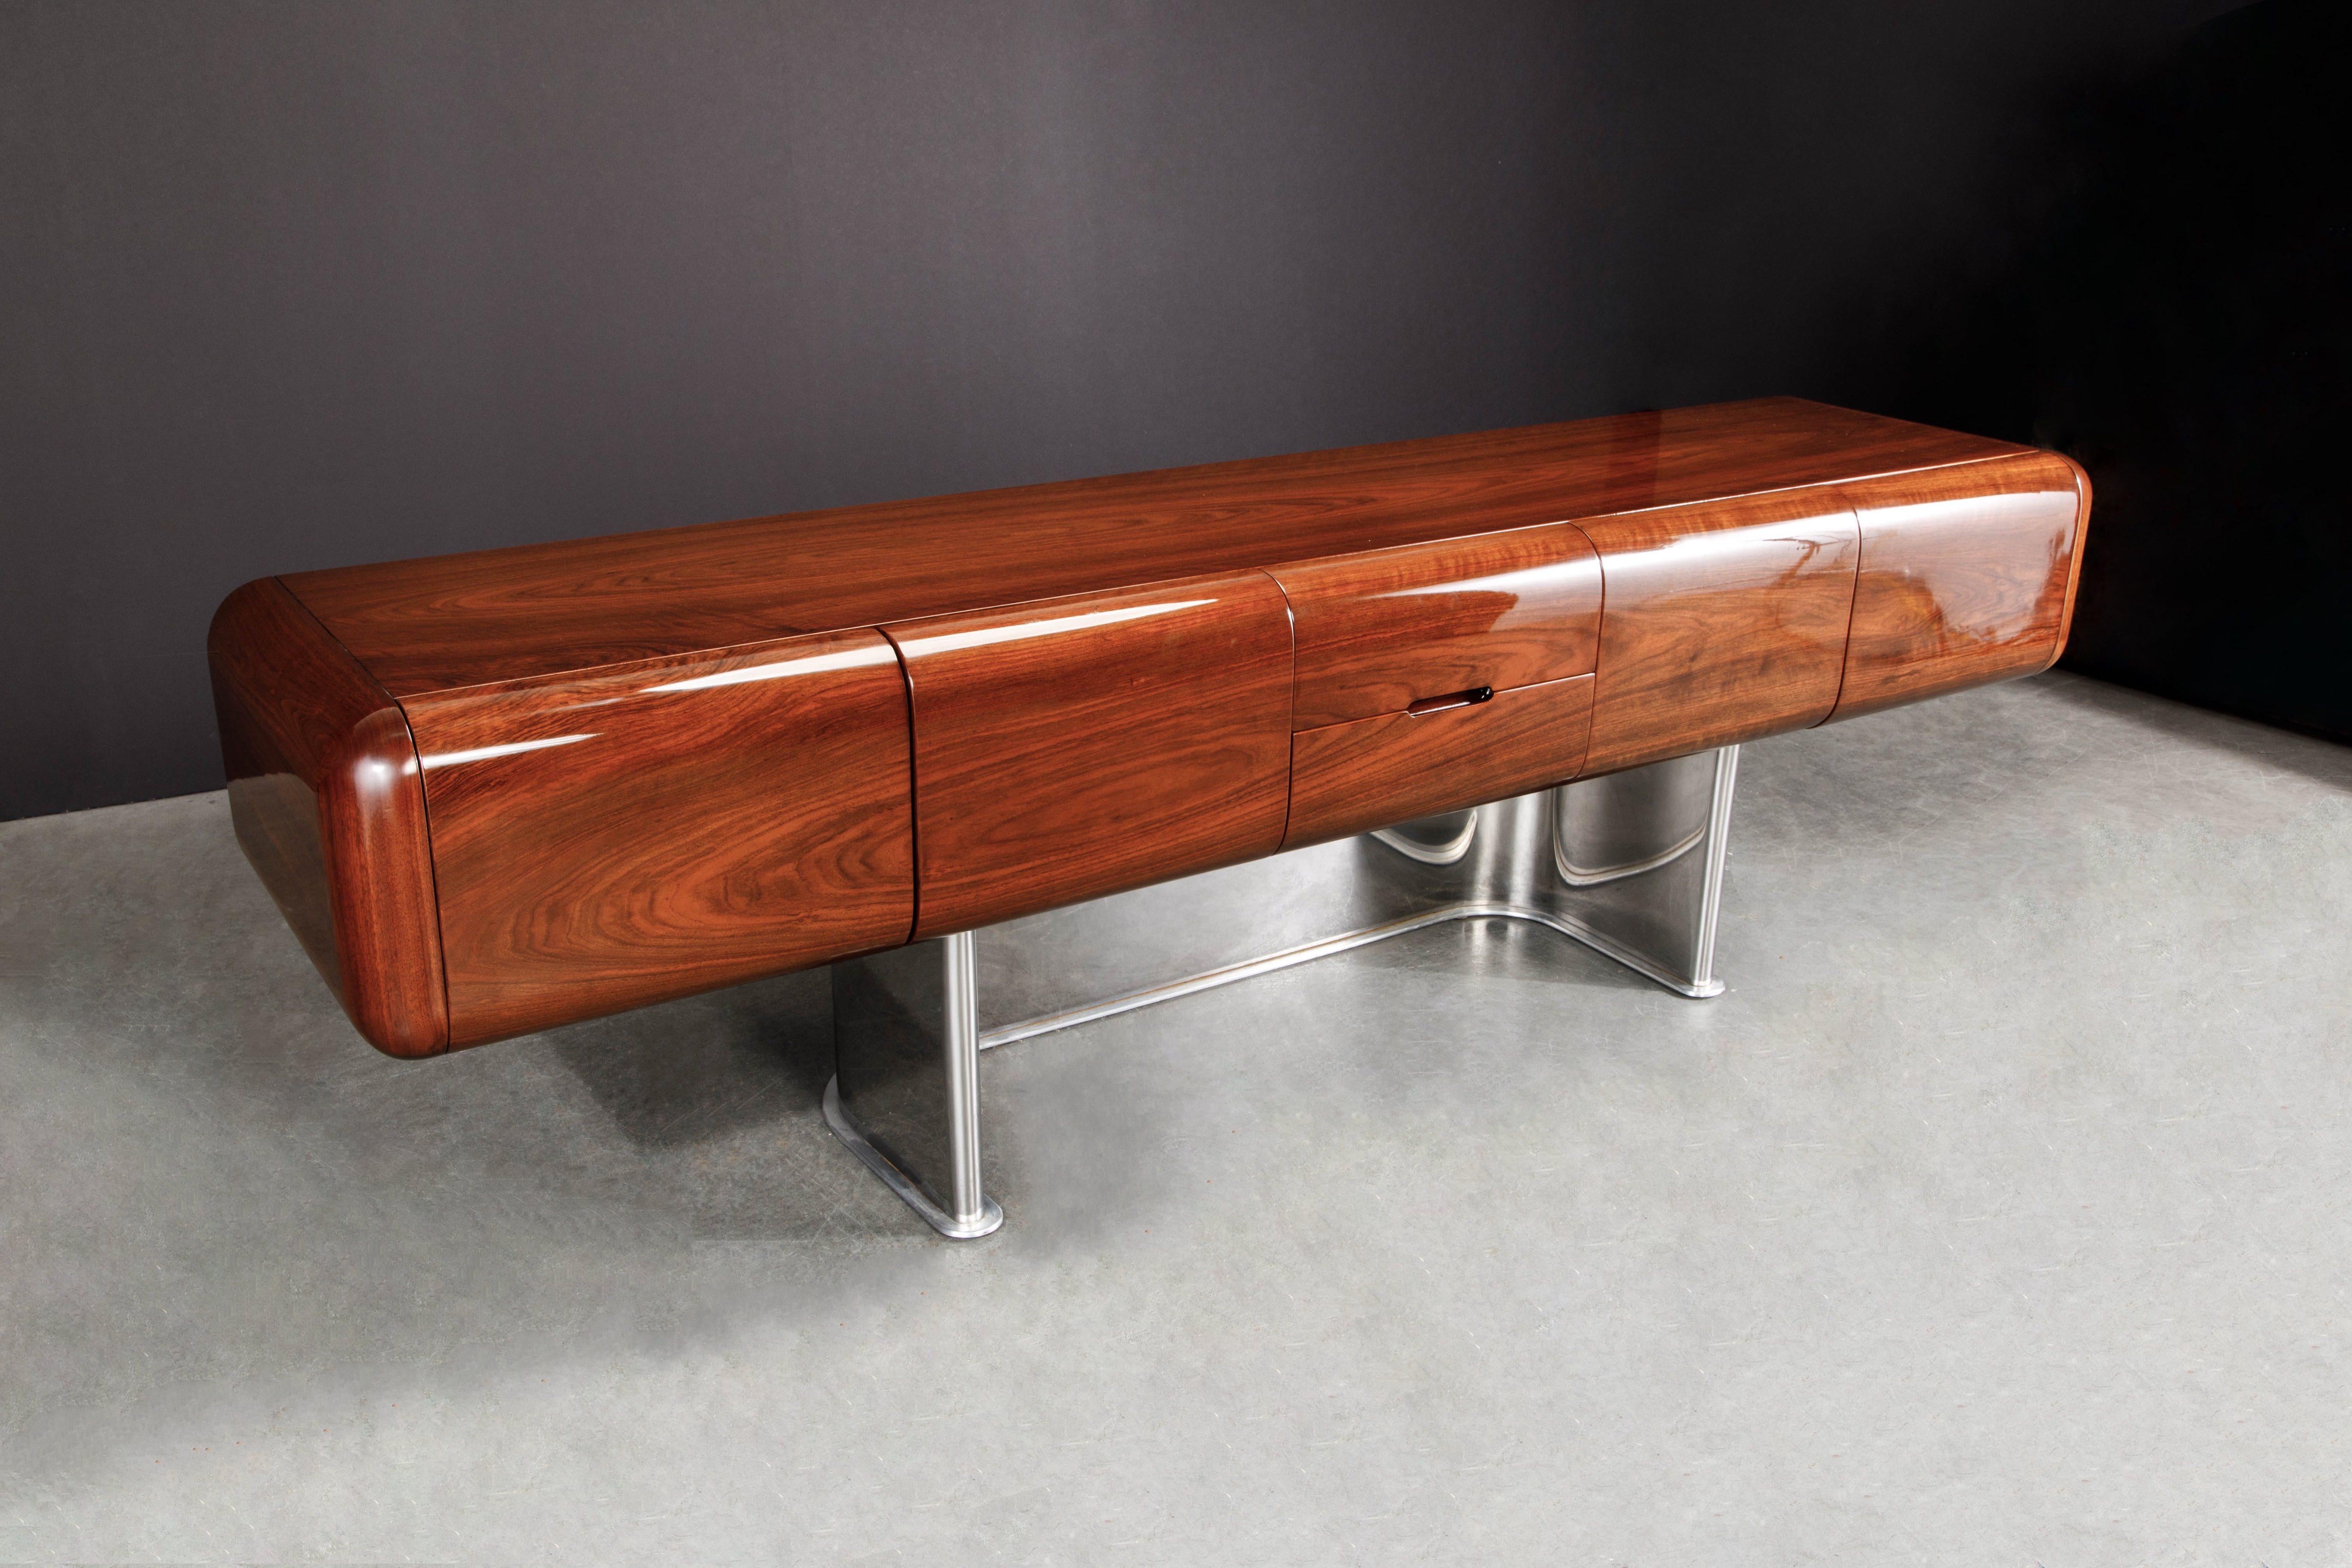 Chrome 'Tomorrow' Floating Executive Credenza by M.F. Harty for Stow Davis, 1974 Signed